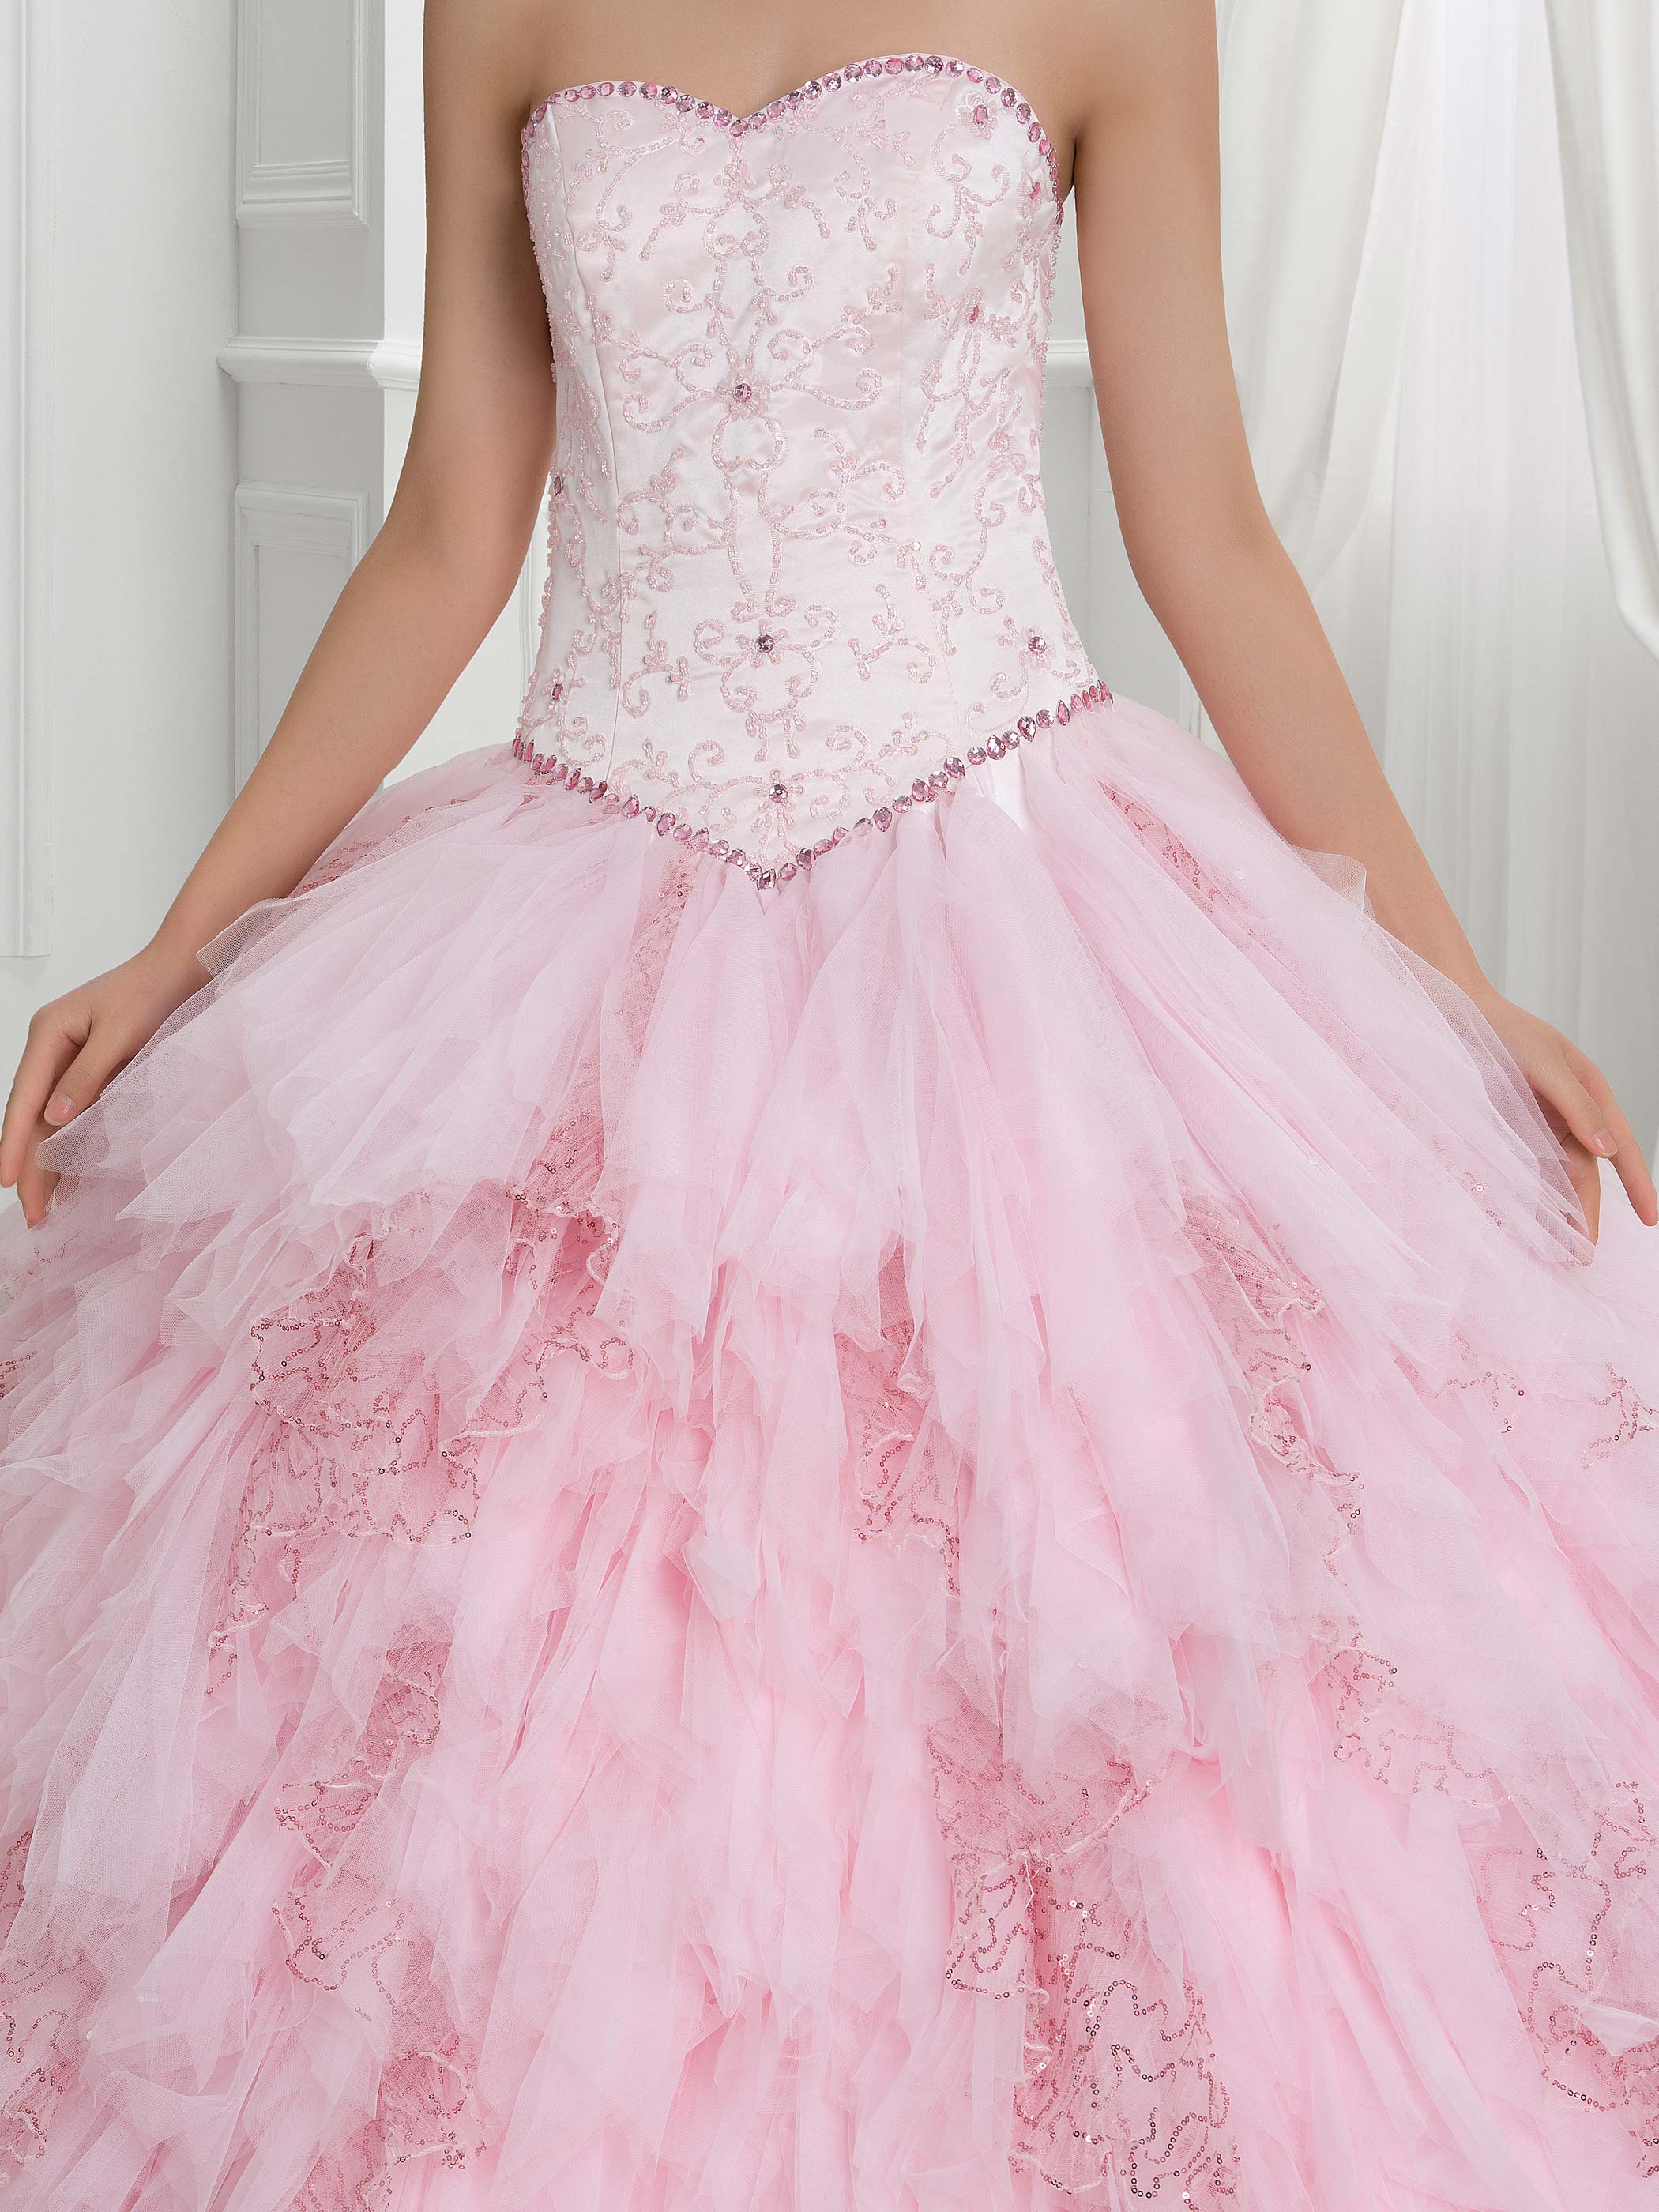 Ericdress Beading Sequins Tiered Ball Gown Quinceanera Dress With Jacket/Shawl